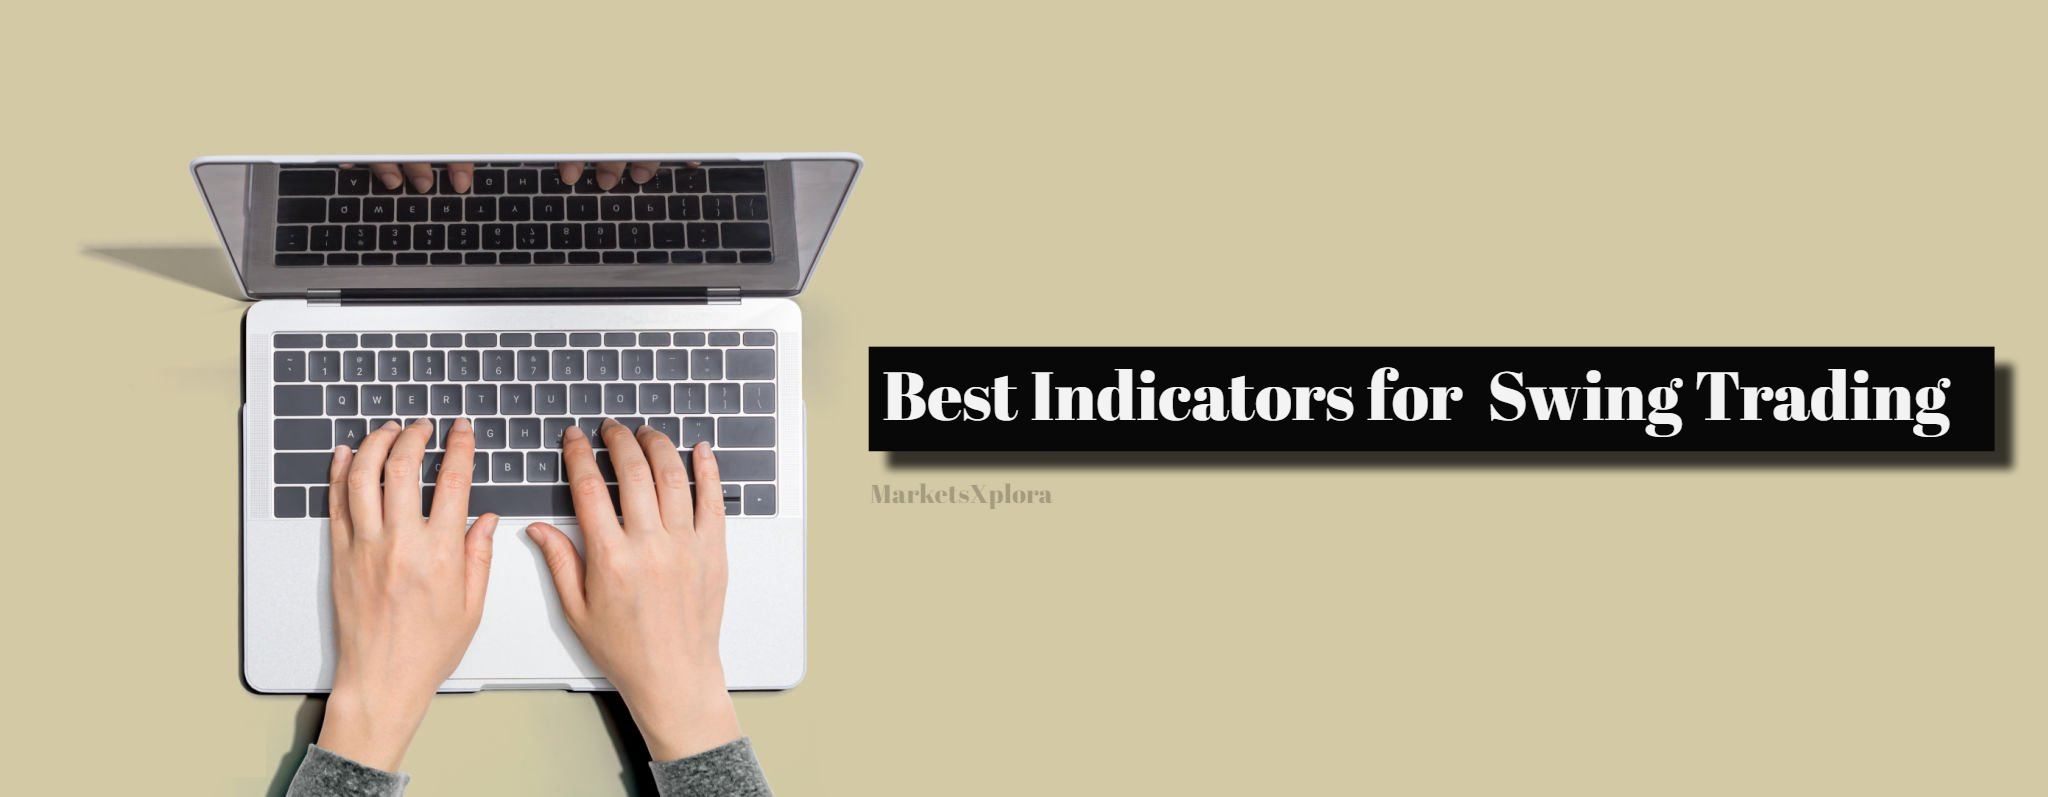 Discover the top 4 best indicators for swing trading. Moving averages, MACD, RSI and Bollinger Bands can improve timing and confirmation of profitable short term price swings.